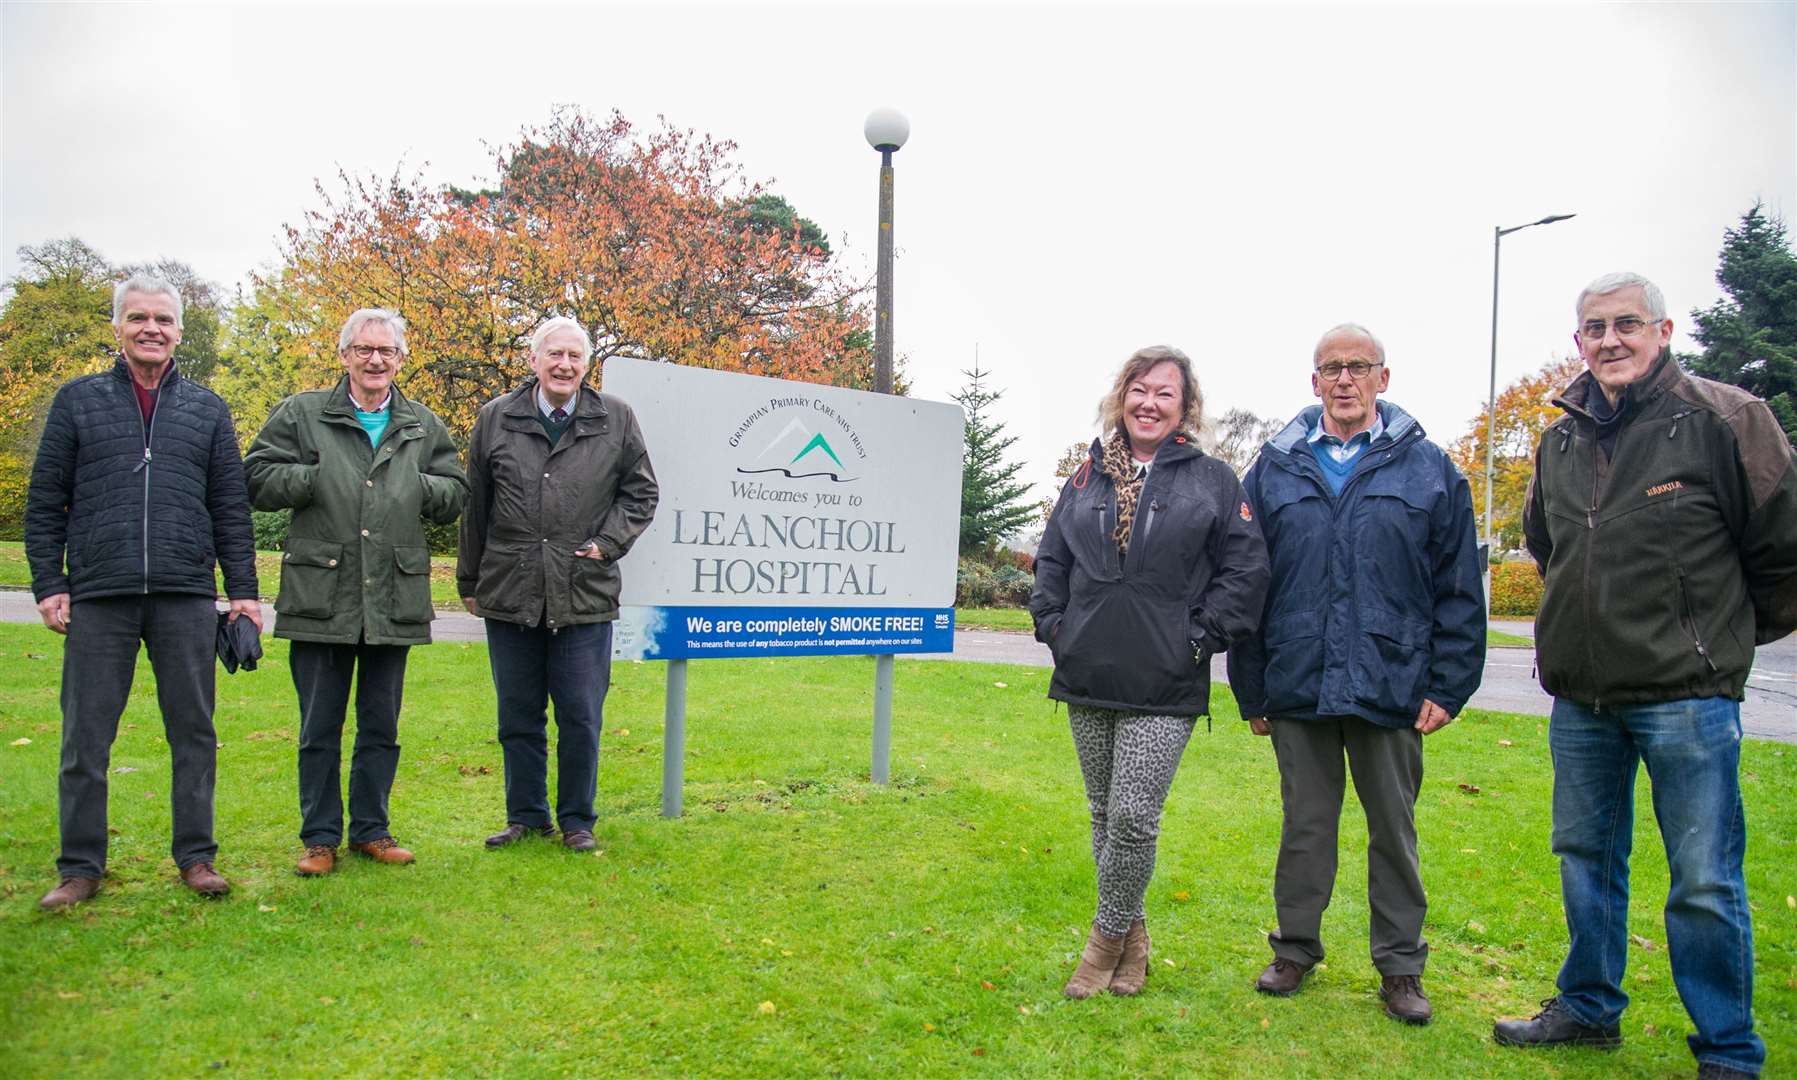 Leanchoil Trustees (from left) Graham Hilditch, Tom Duff, Seymour Monro, Marianne Nicolson, Andres Anderson and Graham Murdoch are looking forward to updating the community.